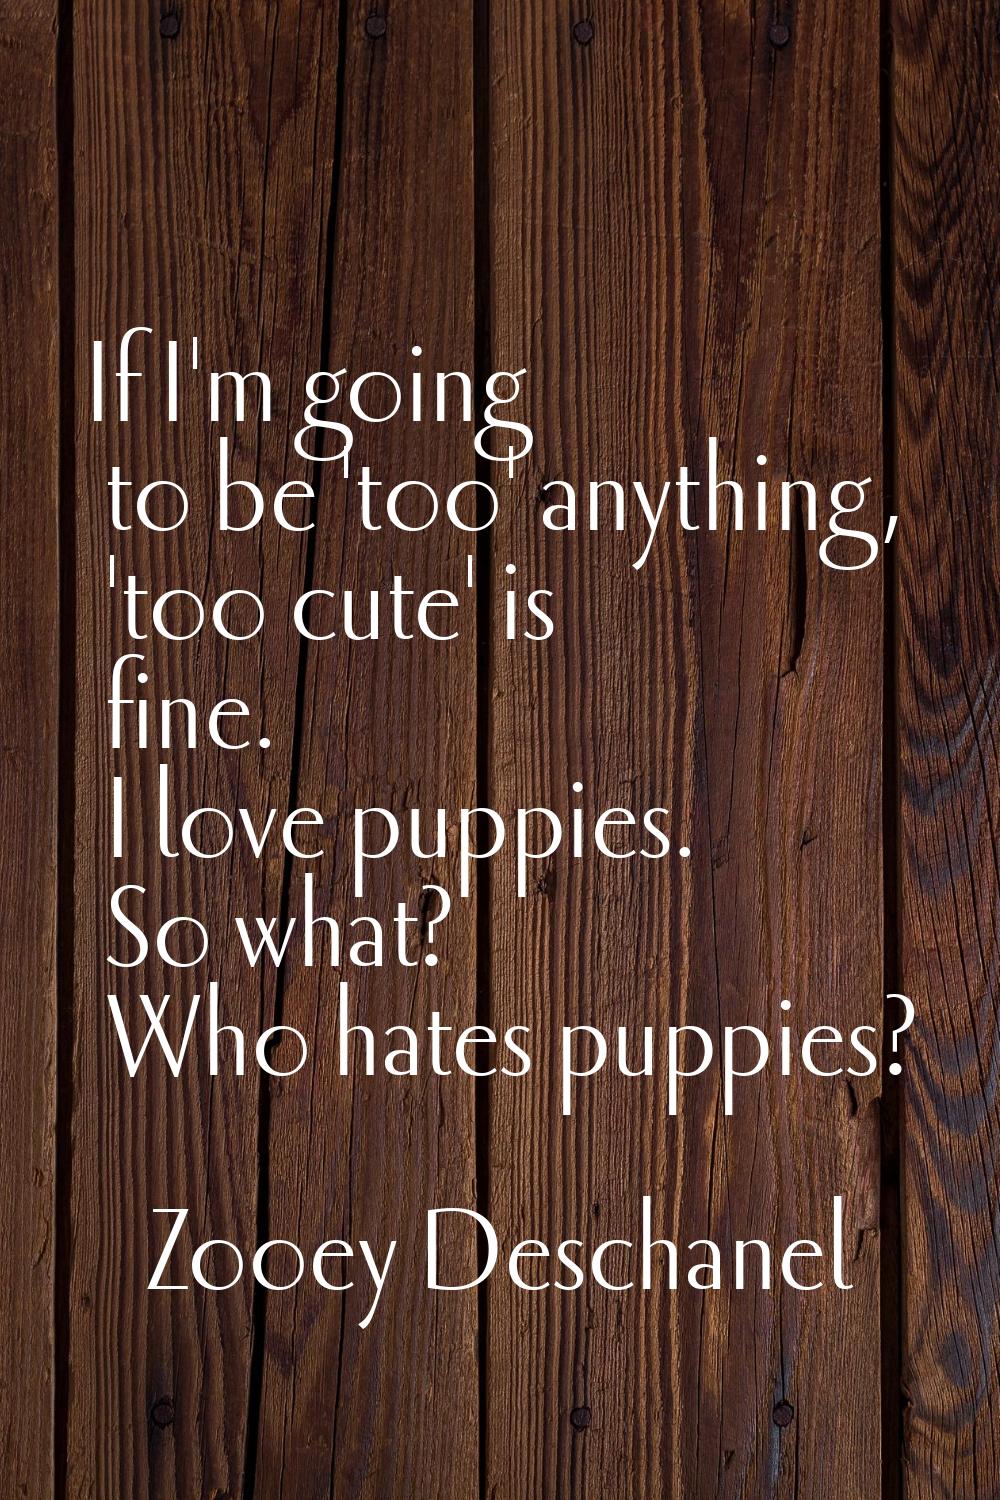 If I'm going to be 'too' anything, 'too cute' is fine. I love puppies. So what? Who hates puppies?